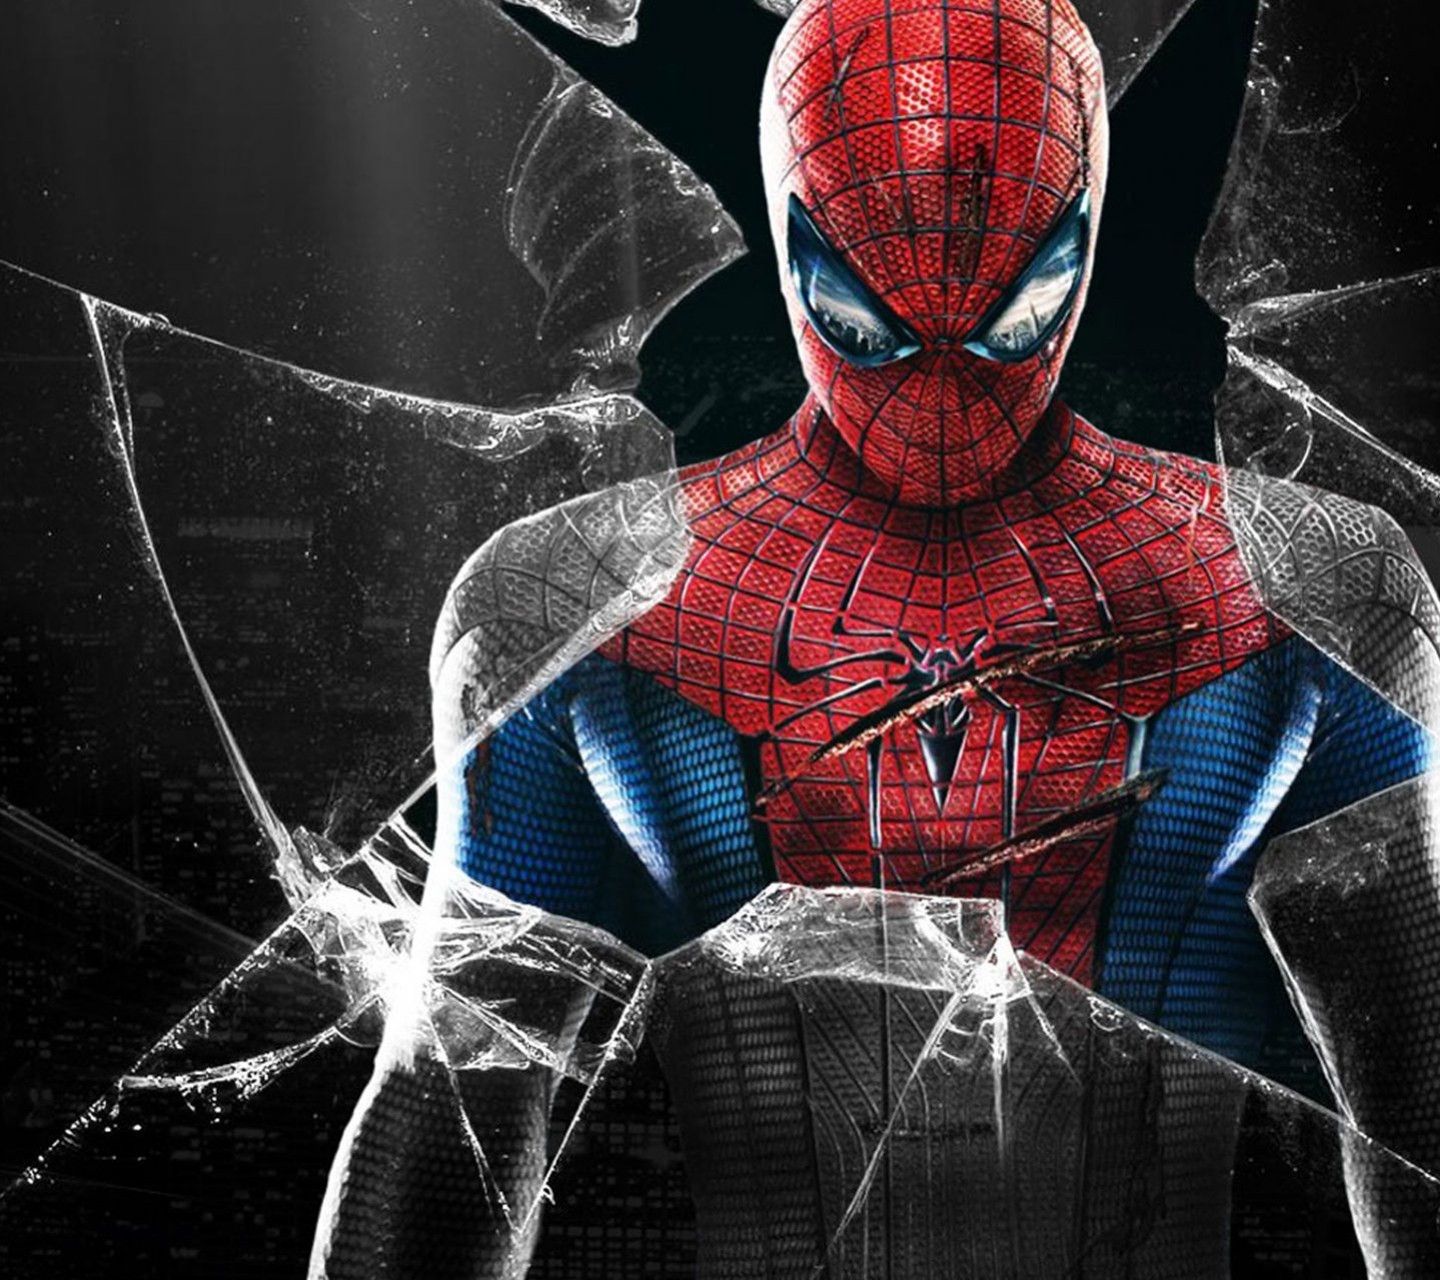 Spiderman Wallpapers For Mobile Group (51+)